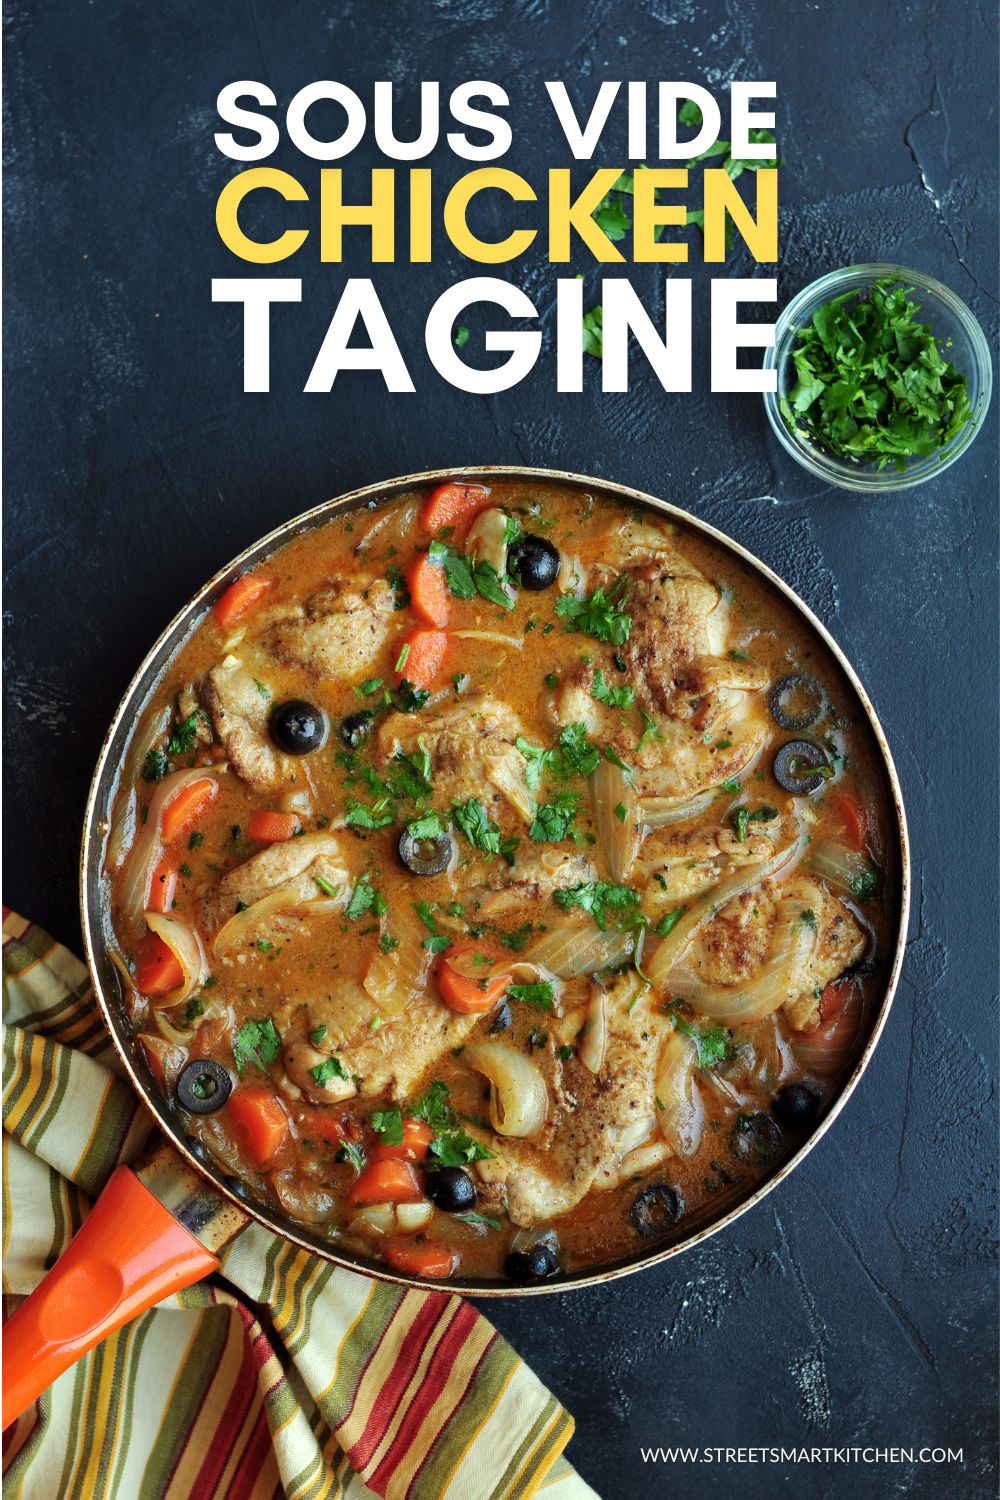 Chicken tagine made with sous vide chicken thighs offers deliciously juicy chicken and bold Moroccan flavors. Ready in an hour.